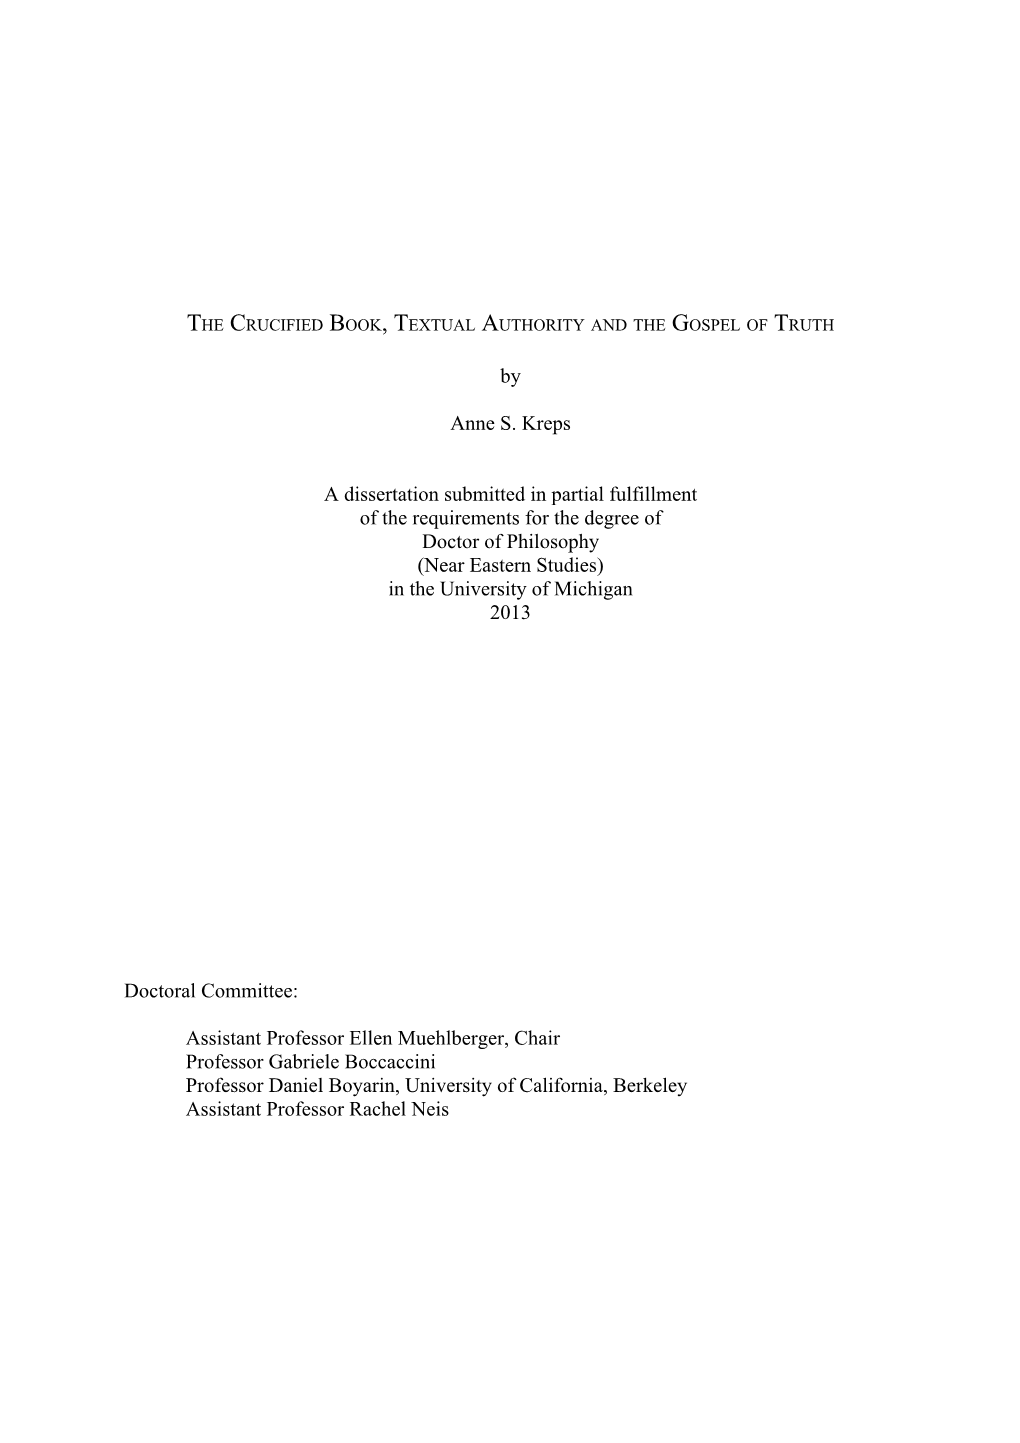 By Anne S. Kreps a Dissertation Submitted in Partial Fulfillment of The